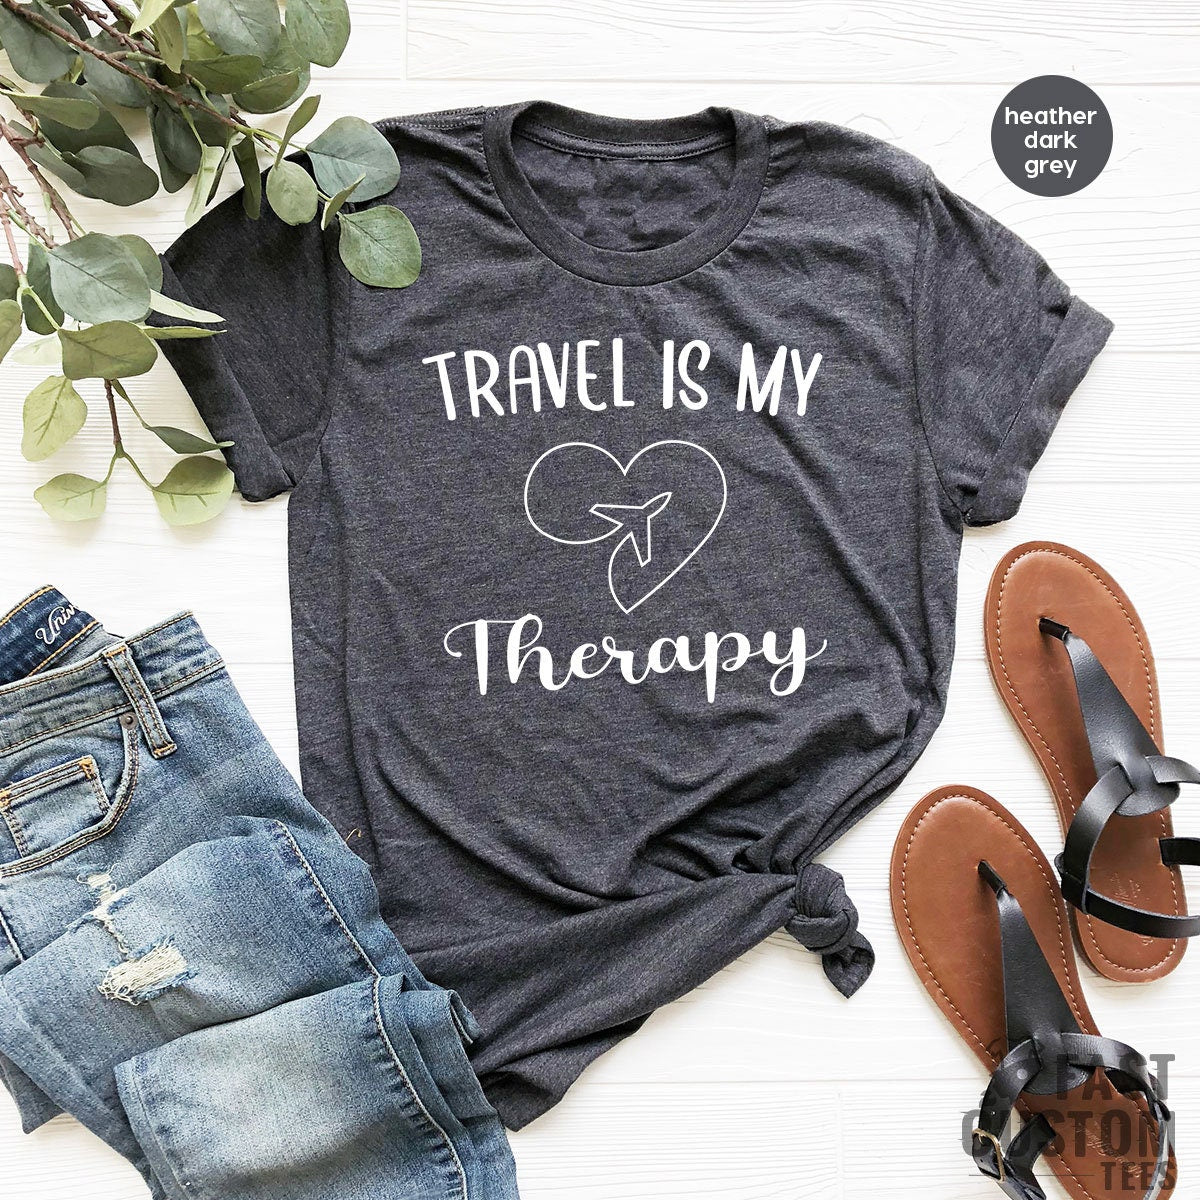 Travel Is My Therapy Shirt, Travel Shirt, Traveler Gift, Funny Travel Shirt, Travel Buddies Shirt, Vacation T Shirt, Gift For Traveler - Fastdeliverytees.com